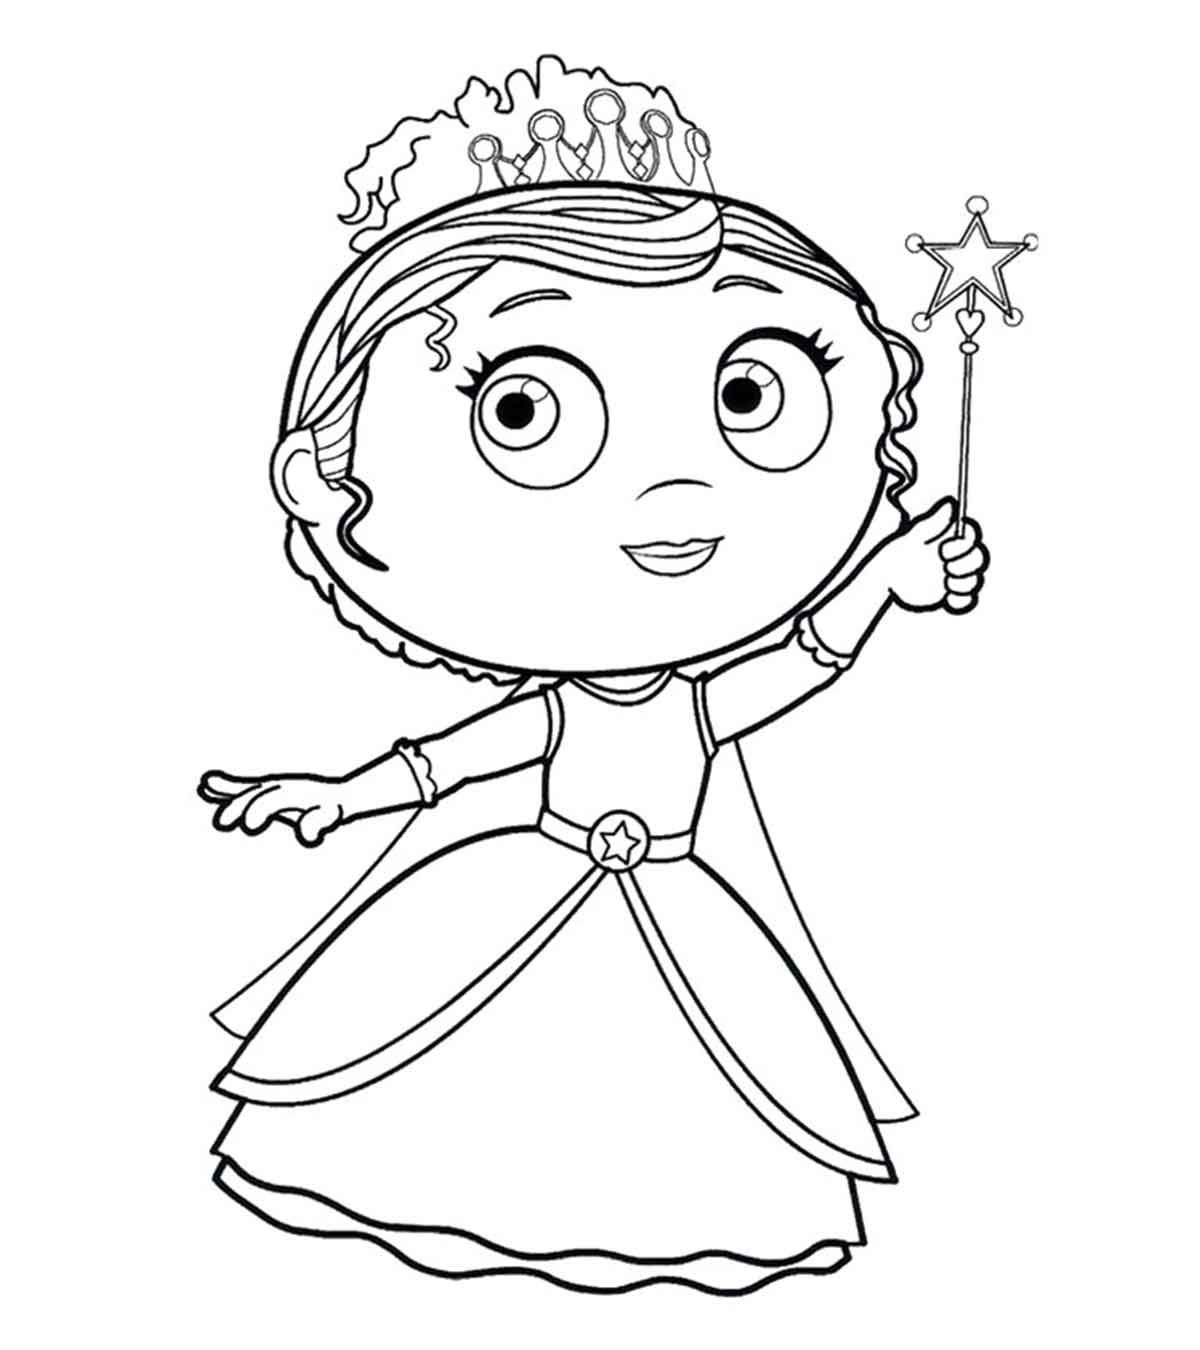 Top 10 ‘Super Why’ Coloring Pages For Your Toddler